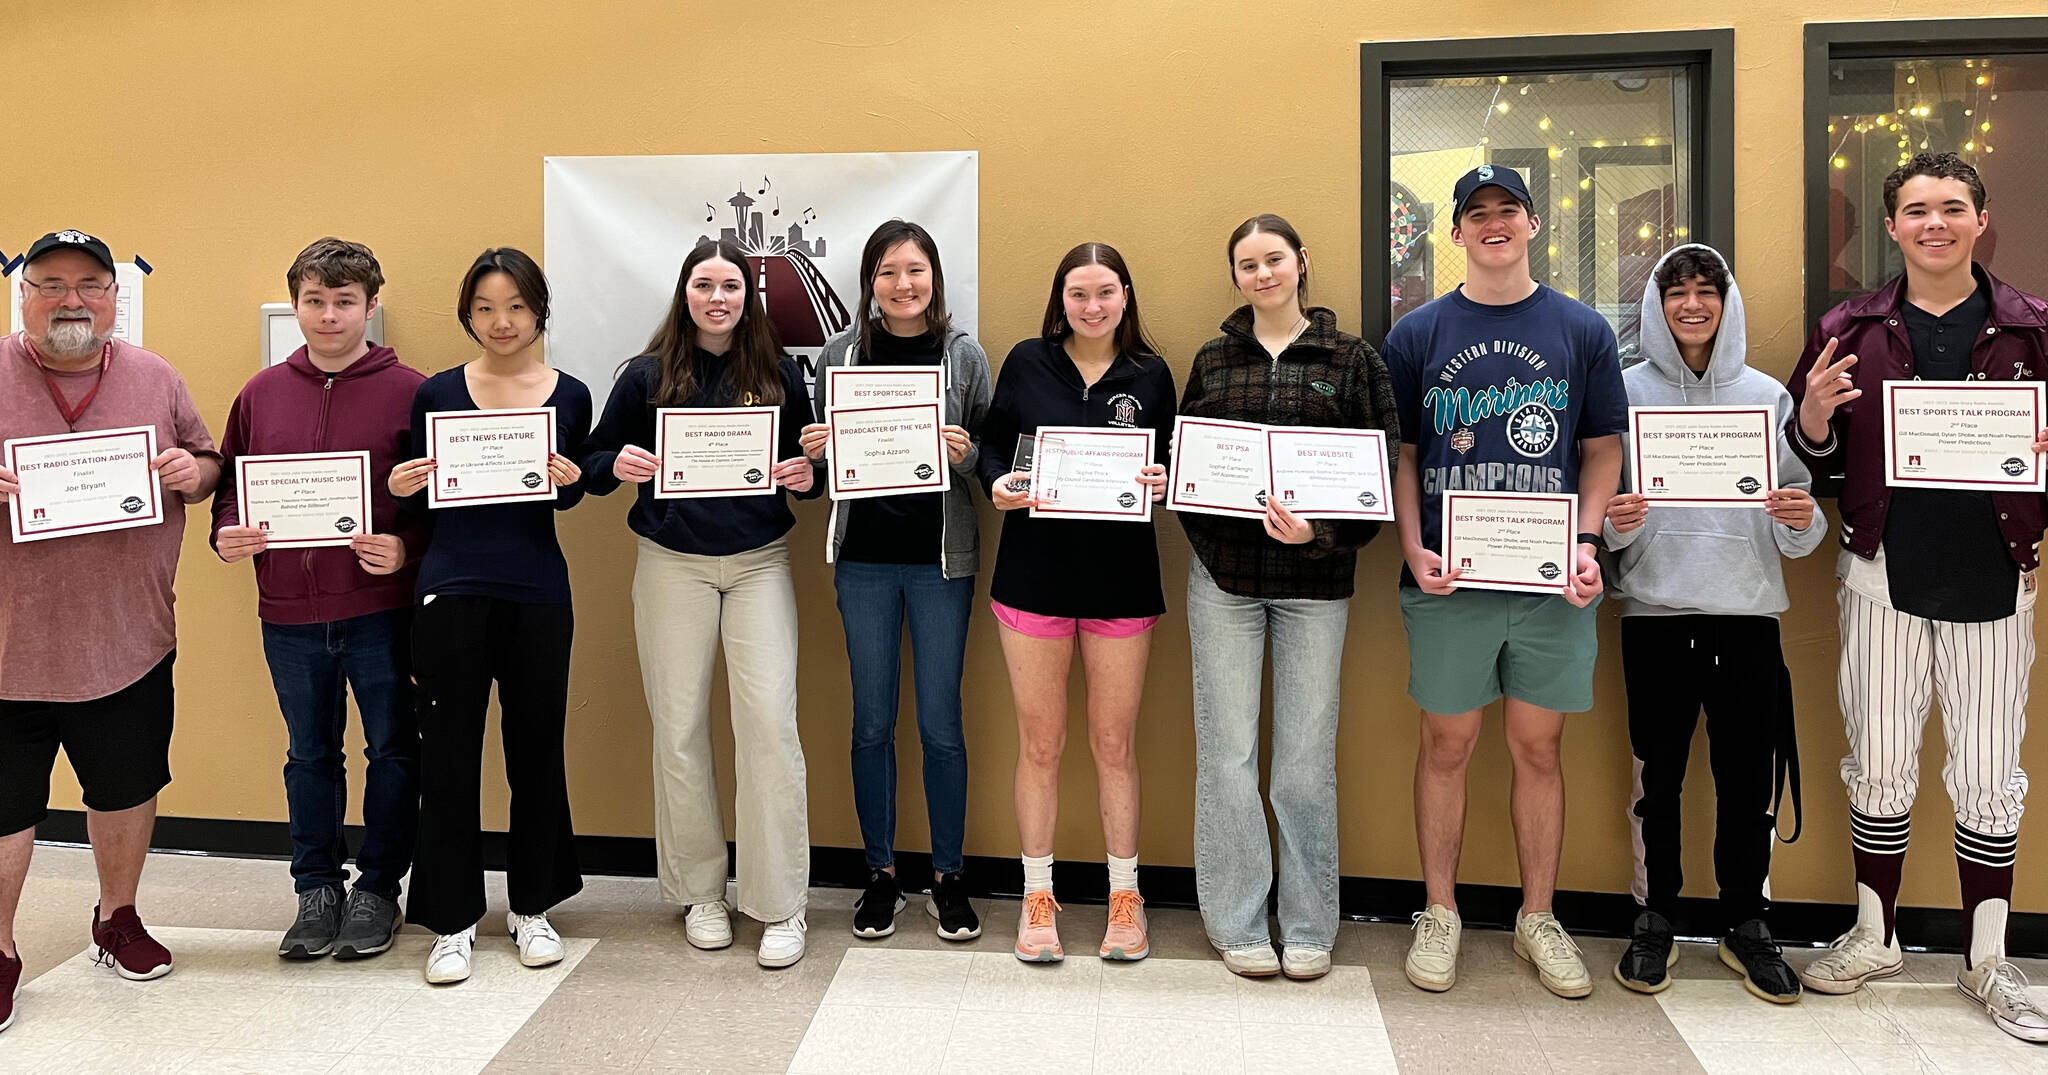 From left to right, KMIH 889 The Bridge general manager and broadcast teacher Joe Bryant along with student broadcasters Theodore Freeman, Grace Go, Annabelle Hegarty, Sophia Azzano, Sophie Prock, Sophie Cartwright, Dylan Shobe, Noah Perlman and Gill MacDonald. Courtesy photo